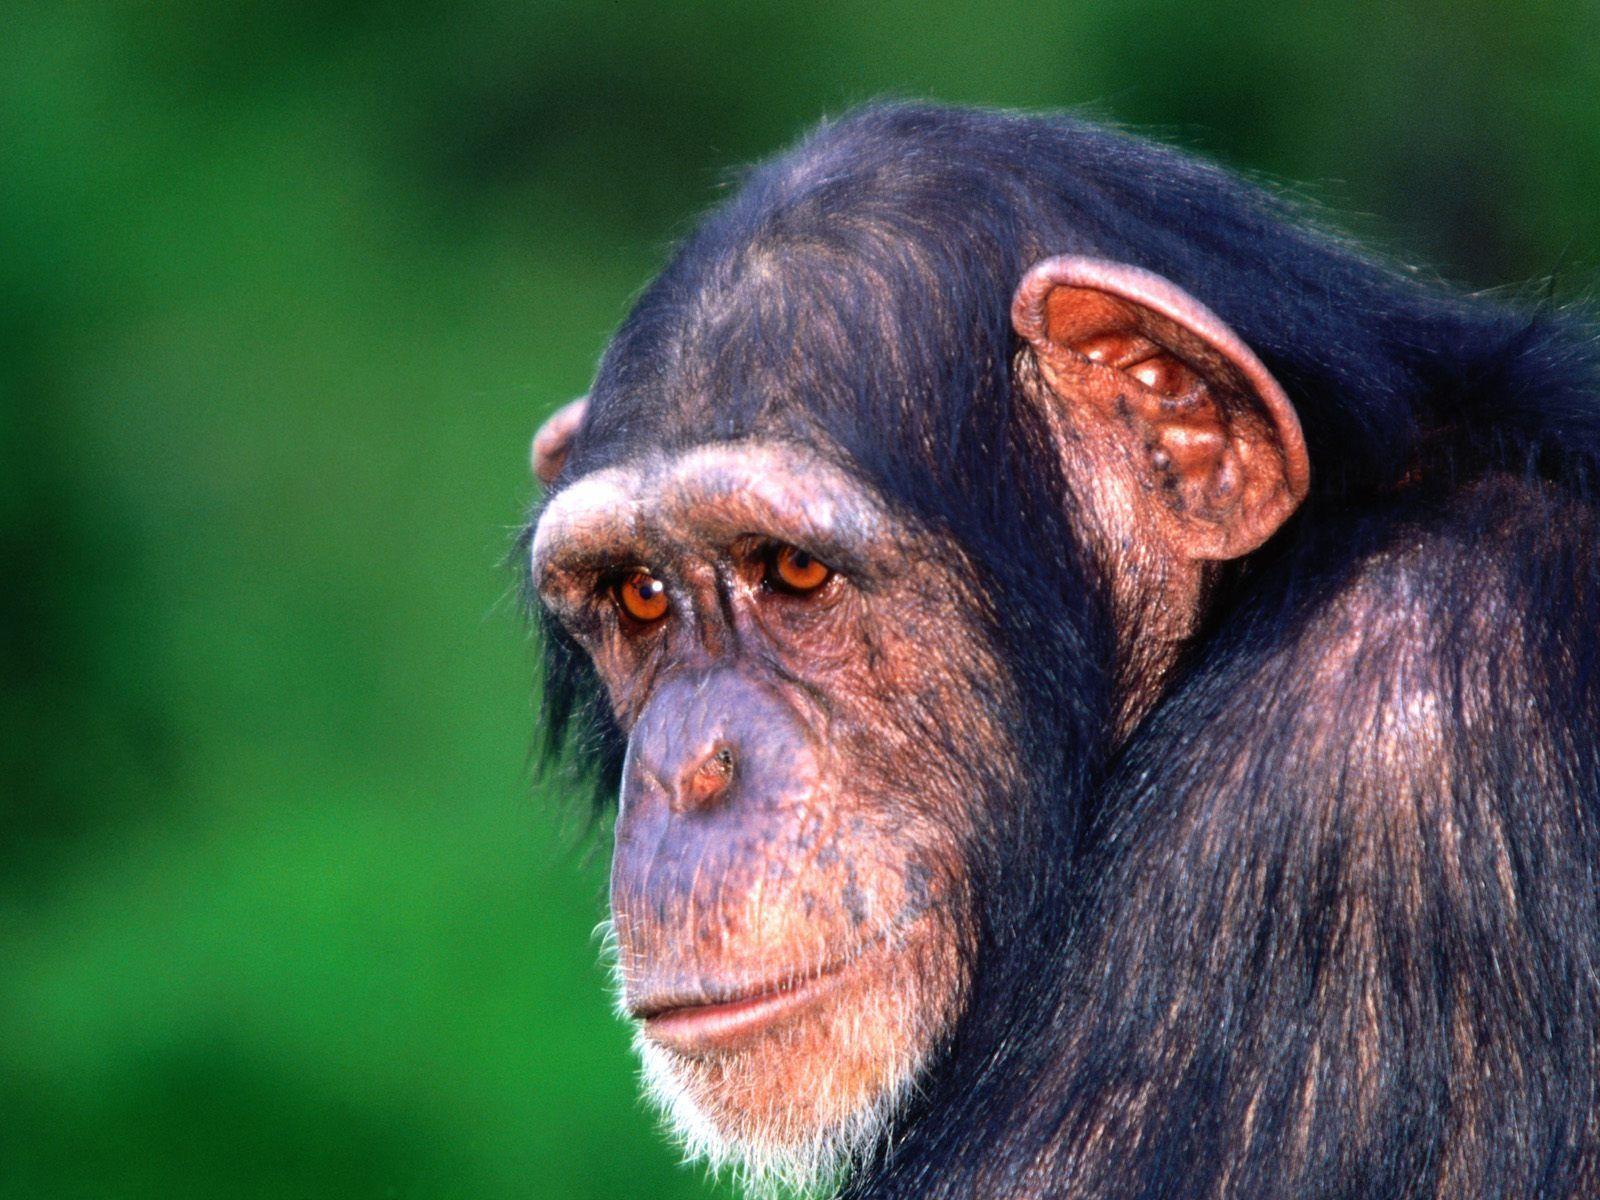 In The Eye Of The Beholder Chimpanzee (id: 188216)